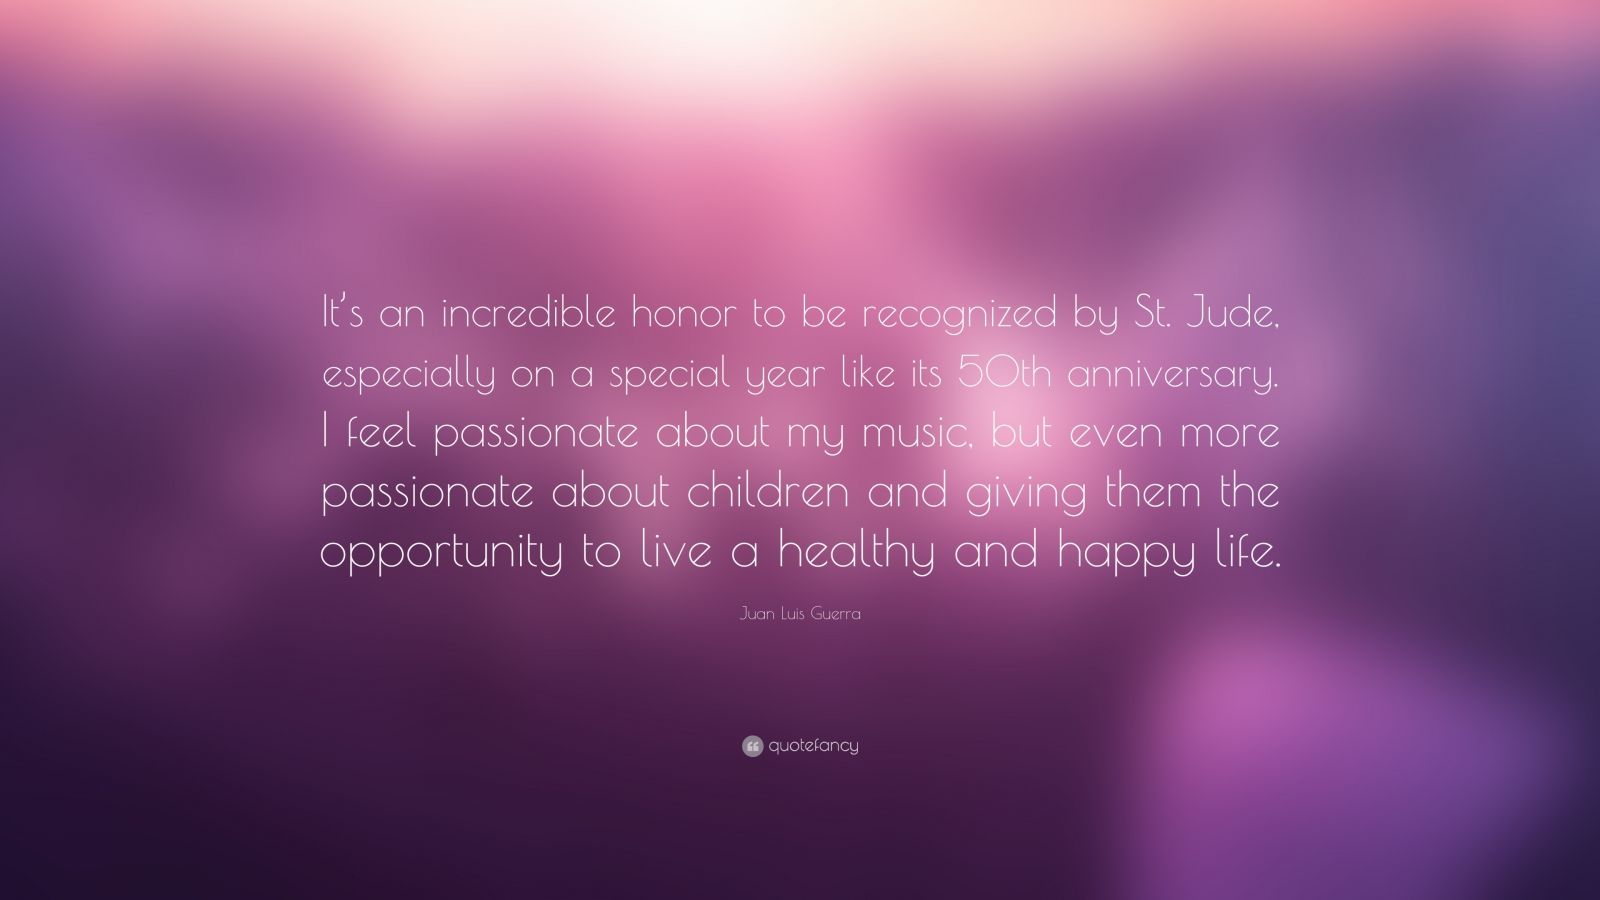 Juan Luis Guerra Quote: “It’s an incredible honor to be recognized by ...